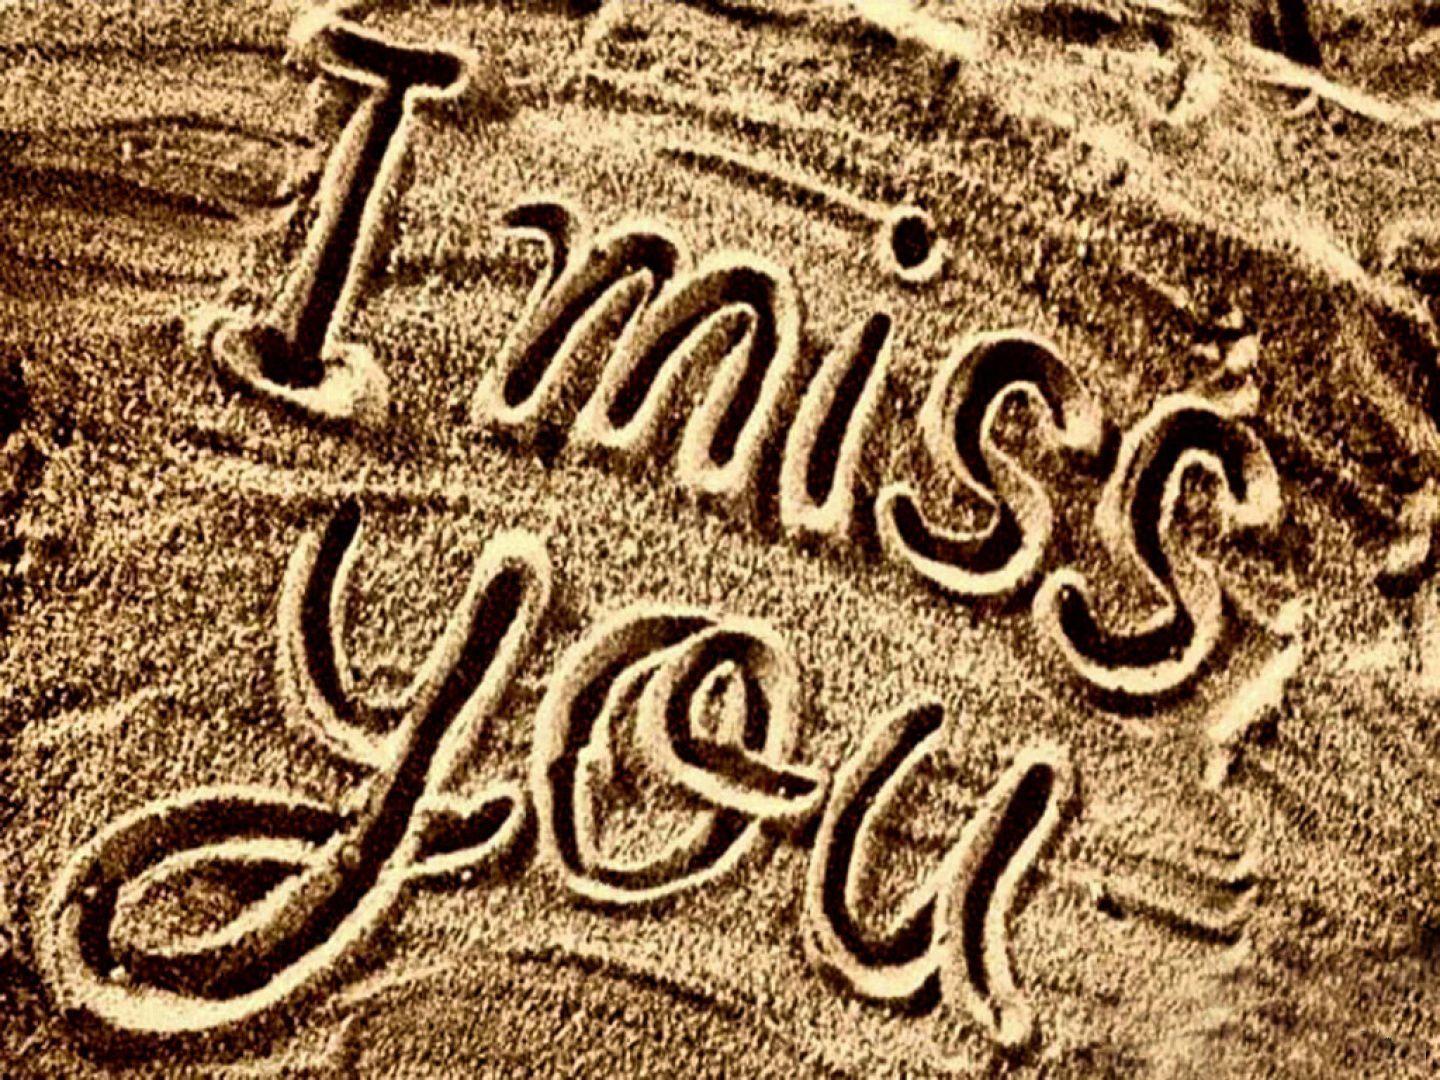 I Miss You Logo Wallpapers - Wallpaper Cave